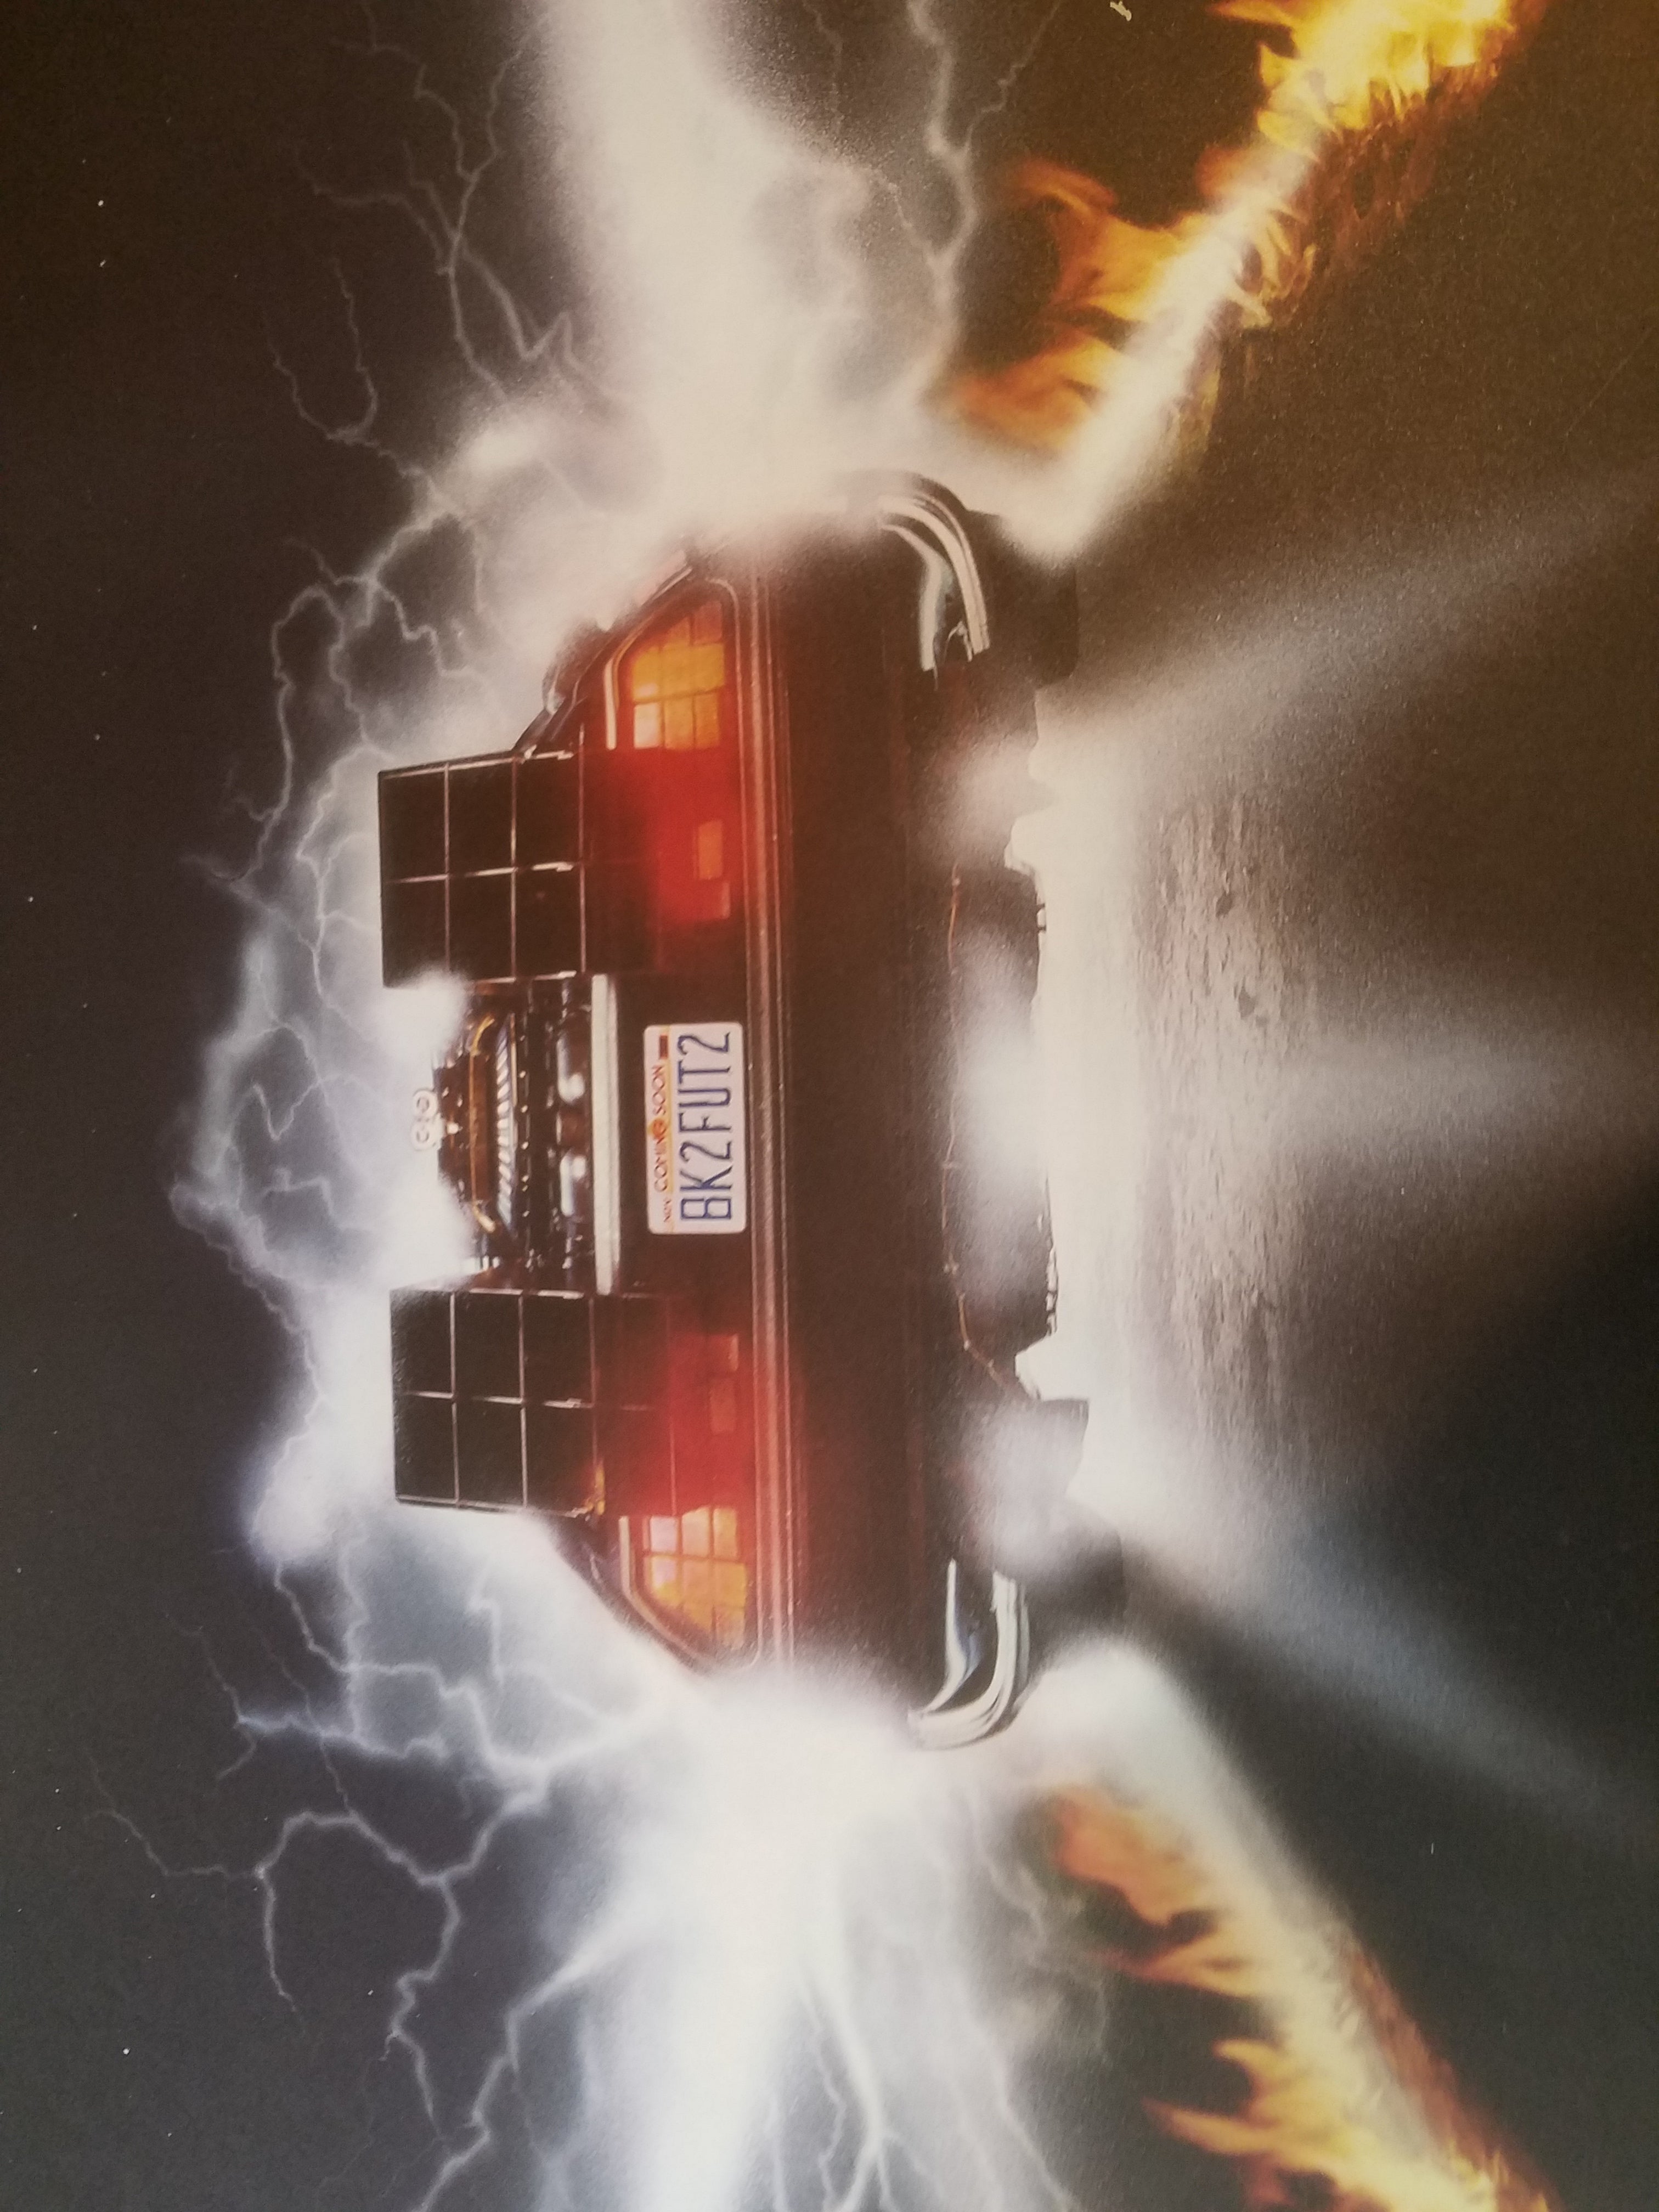 "BACK TO THE FUTURE: PART II - TEASER POSTER - VERSION 1"  Offset lithograph with spot inks.  24 x 36 inches.  Hand-numbered edition of 175.  Co-released with Vice Press.